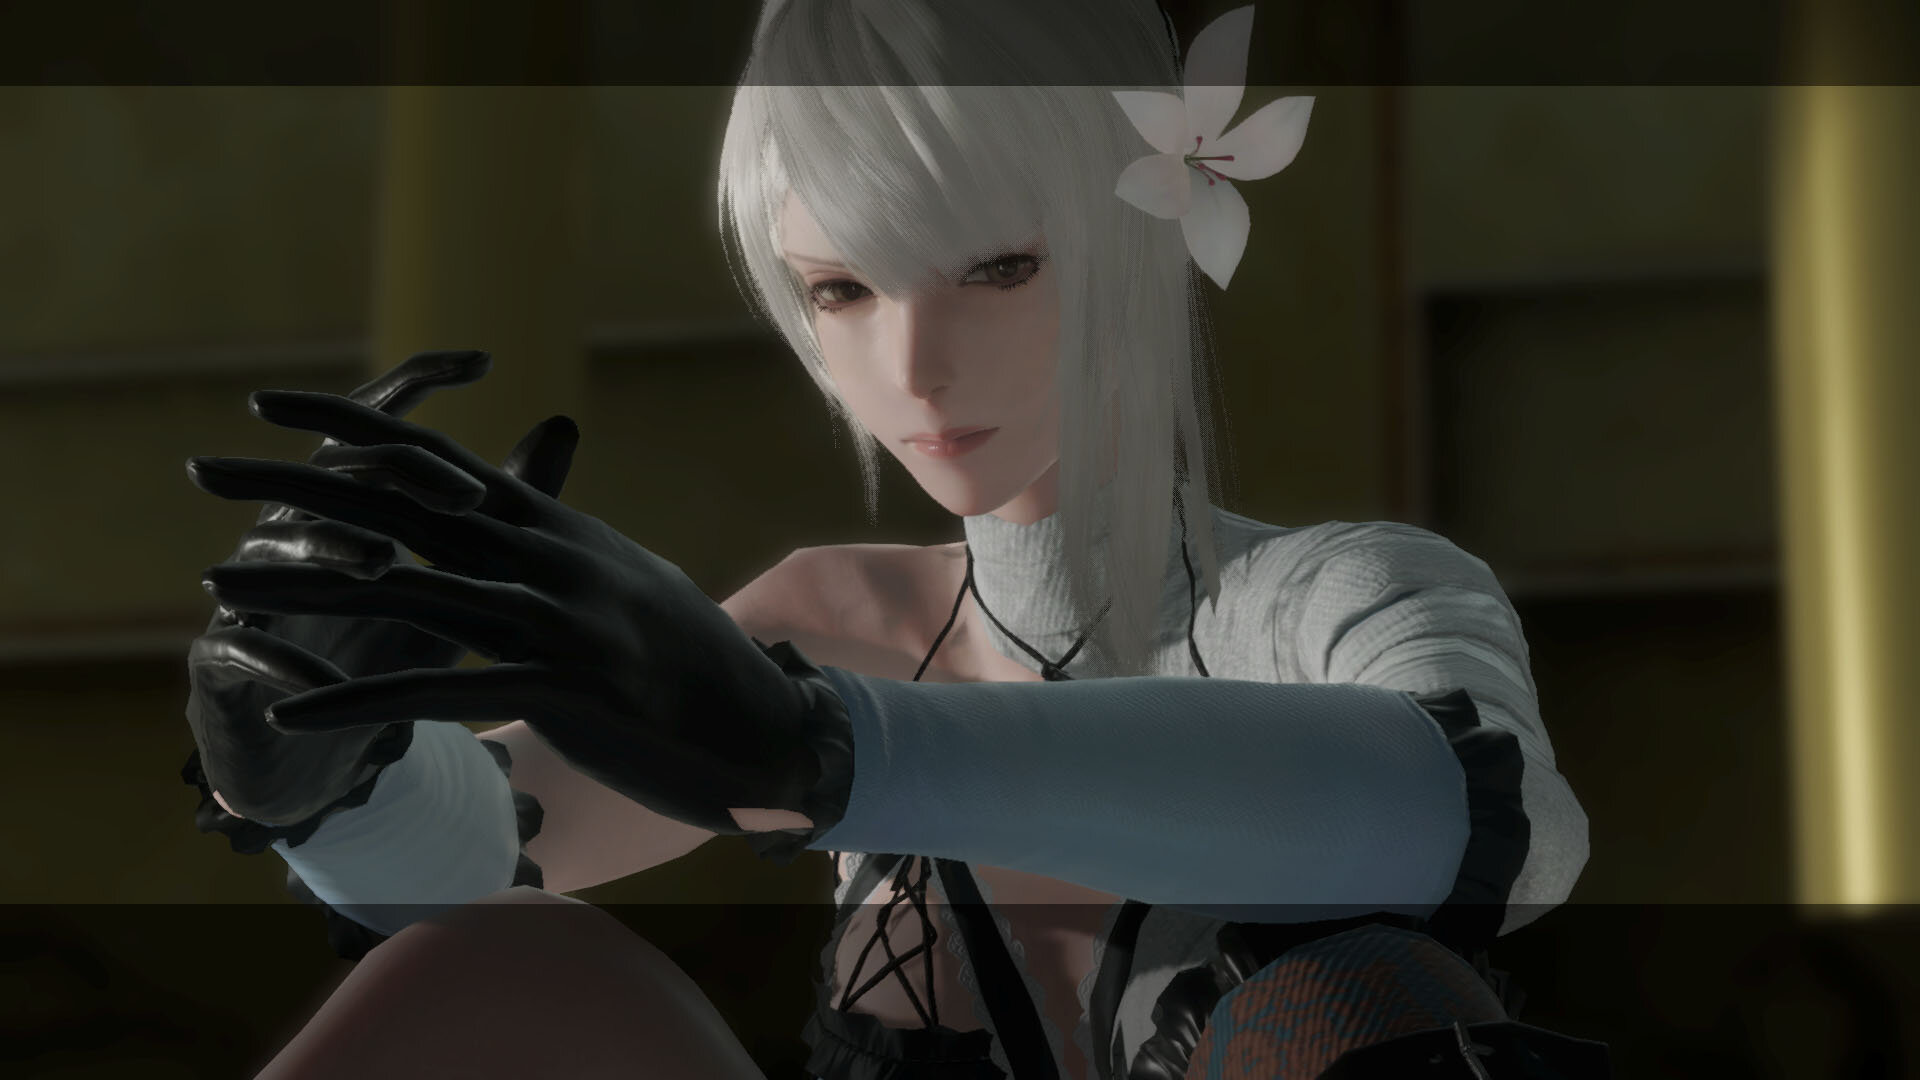 NieR:Automata Creator Is Making a New Game With Square Enix; NieR Replicant  Remake Is Looking Good Too